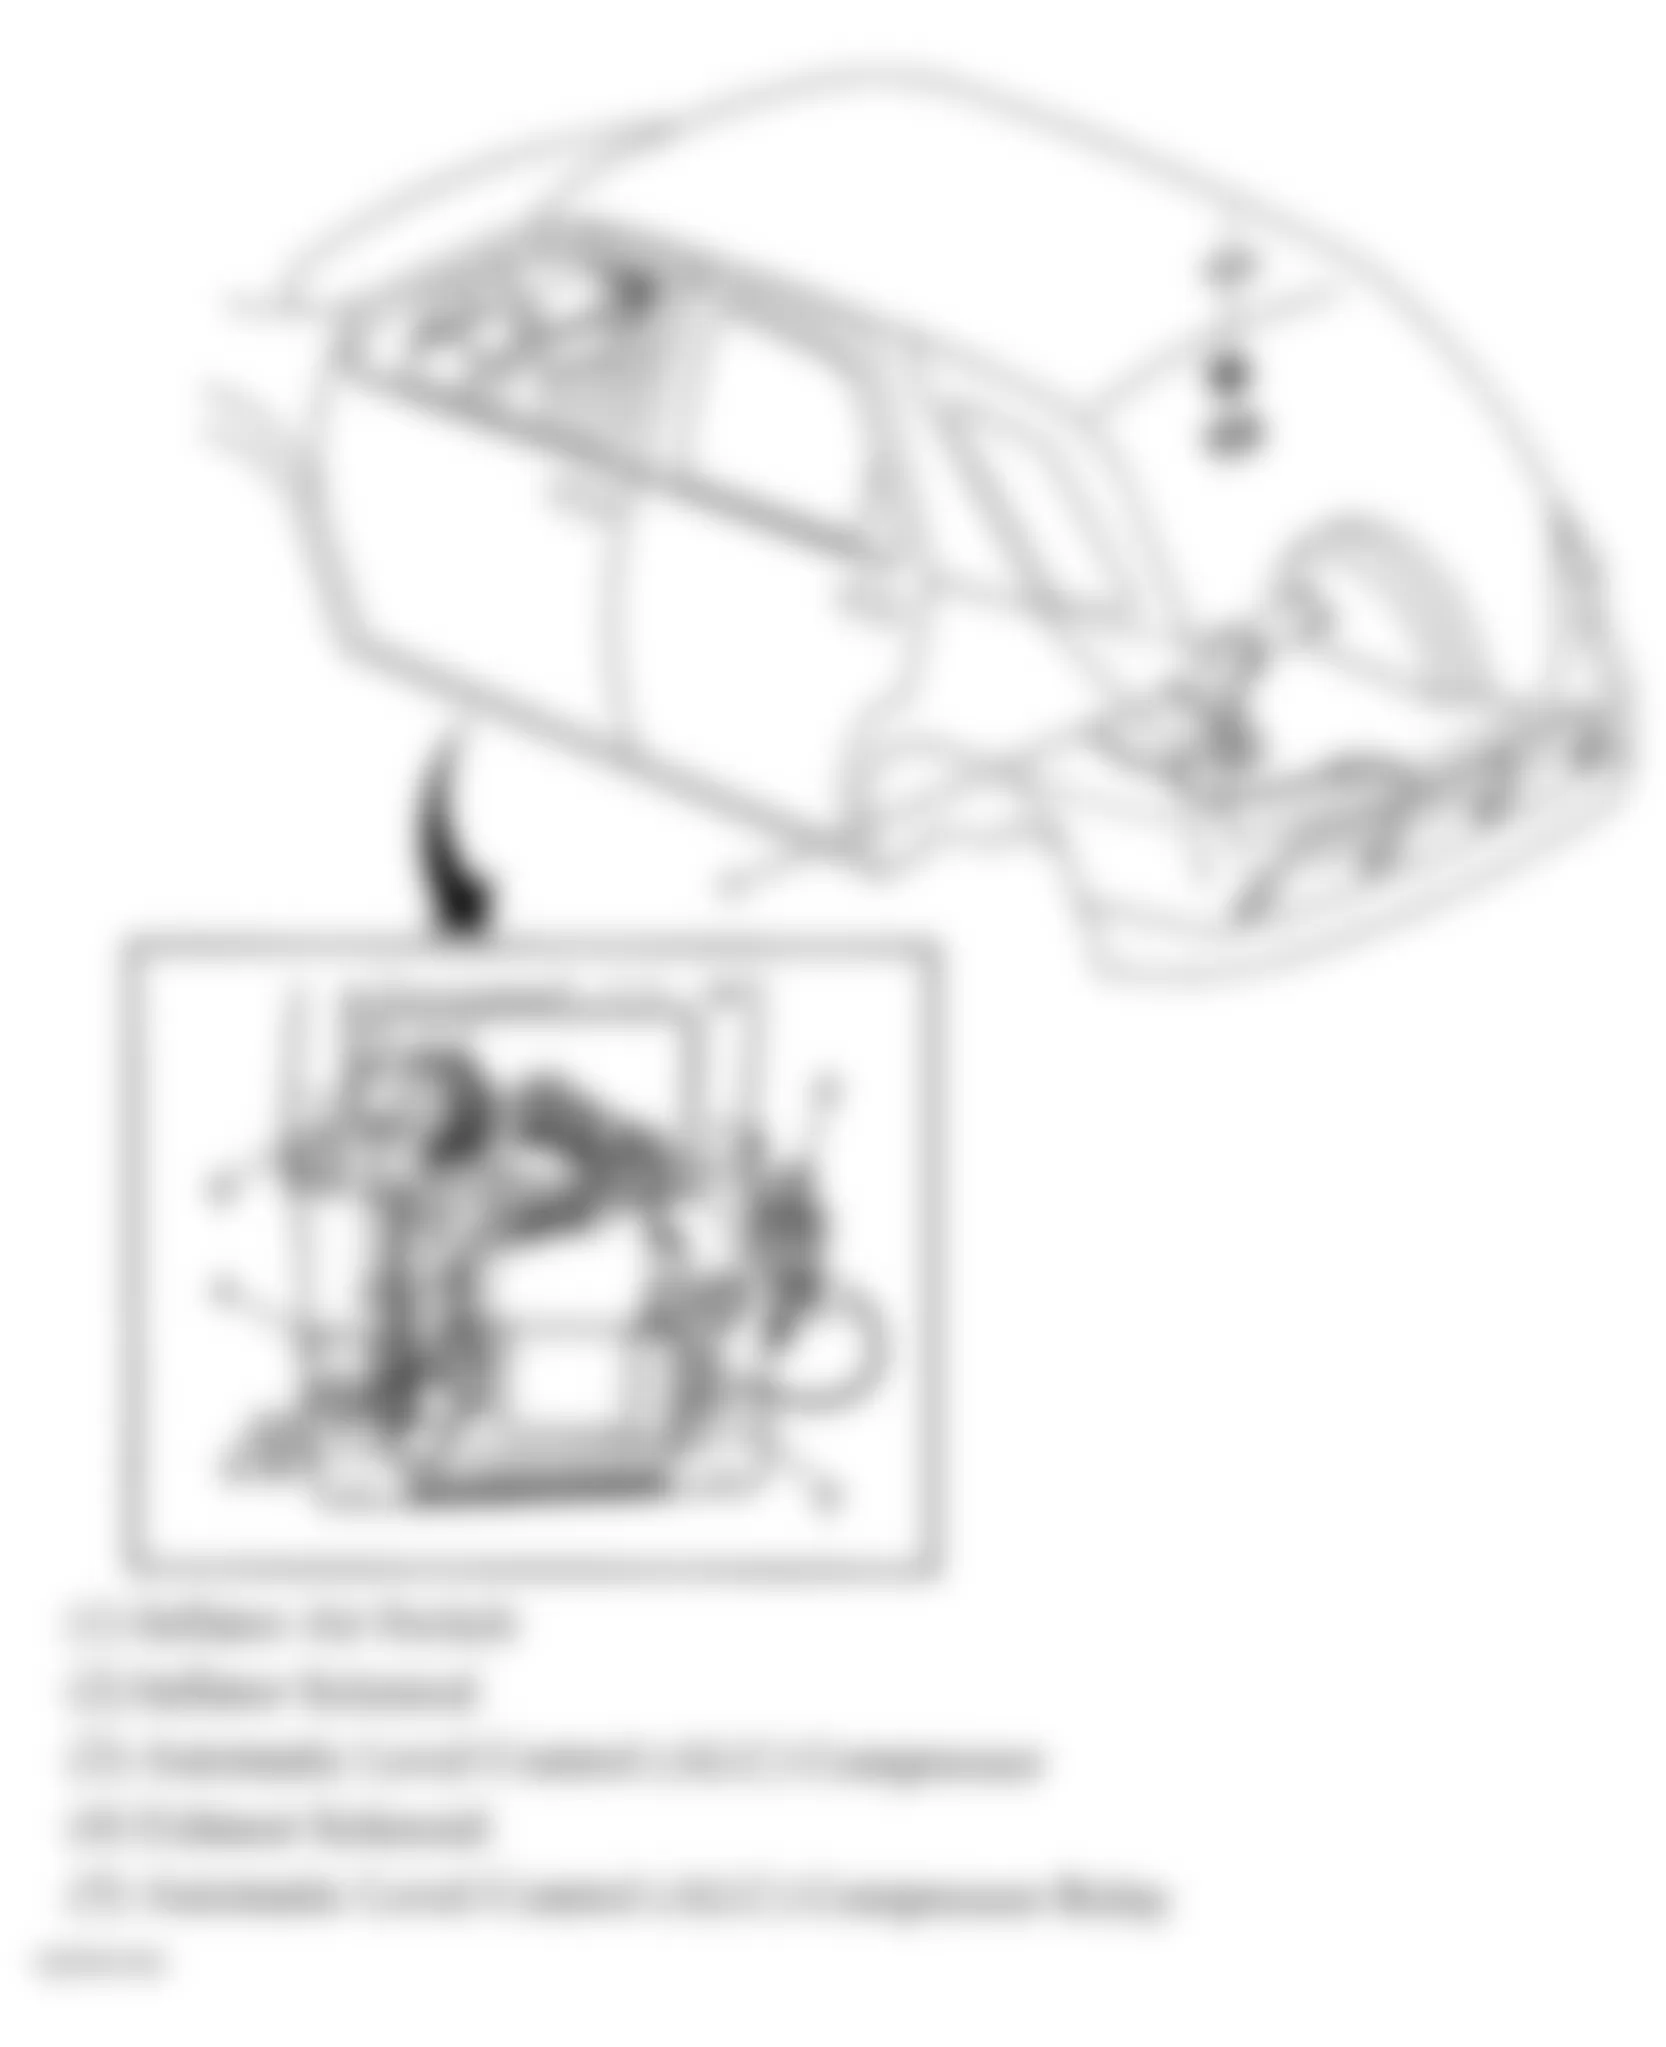 Buick Rendezvous Ultra 2005 - Component Locations -  Rear Of Vehicle